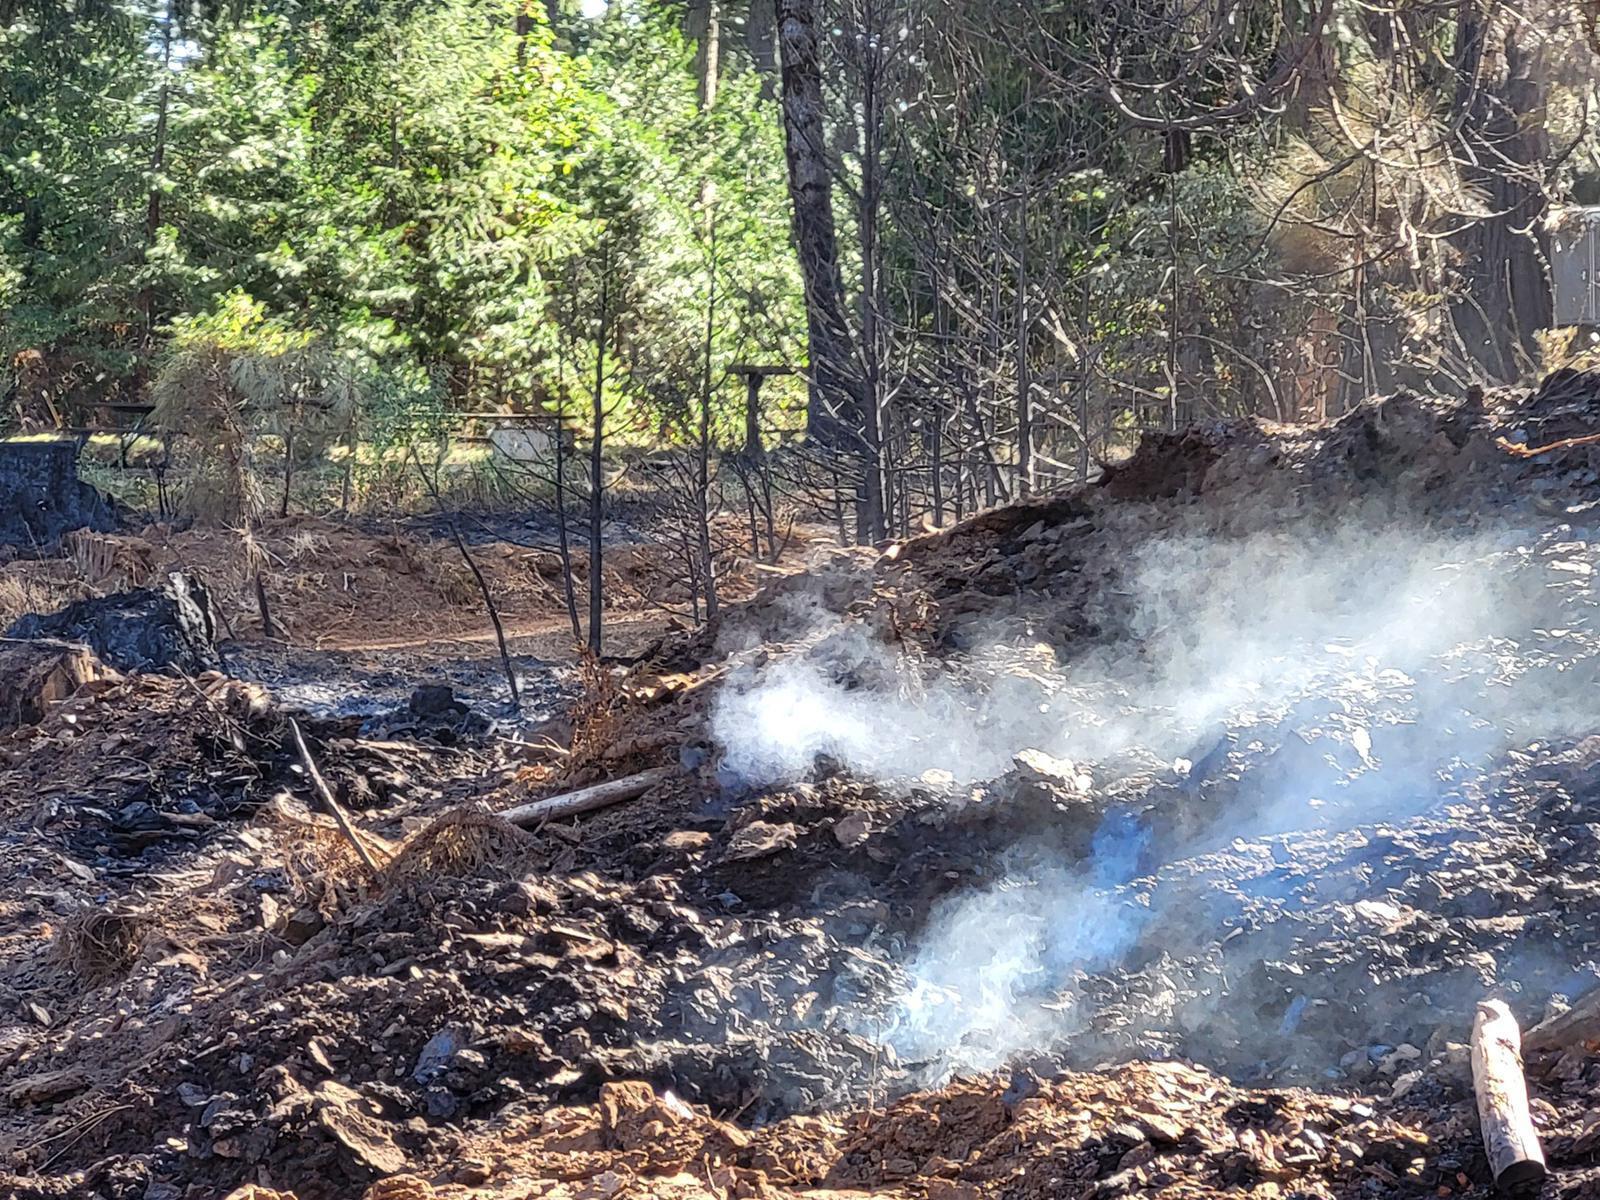 A smoldering rocky mound where a tree had been that remains a hazard in an evacuated area. Example of hazards that need to be eliminated before people can return home.